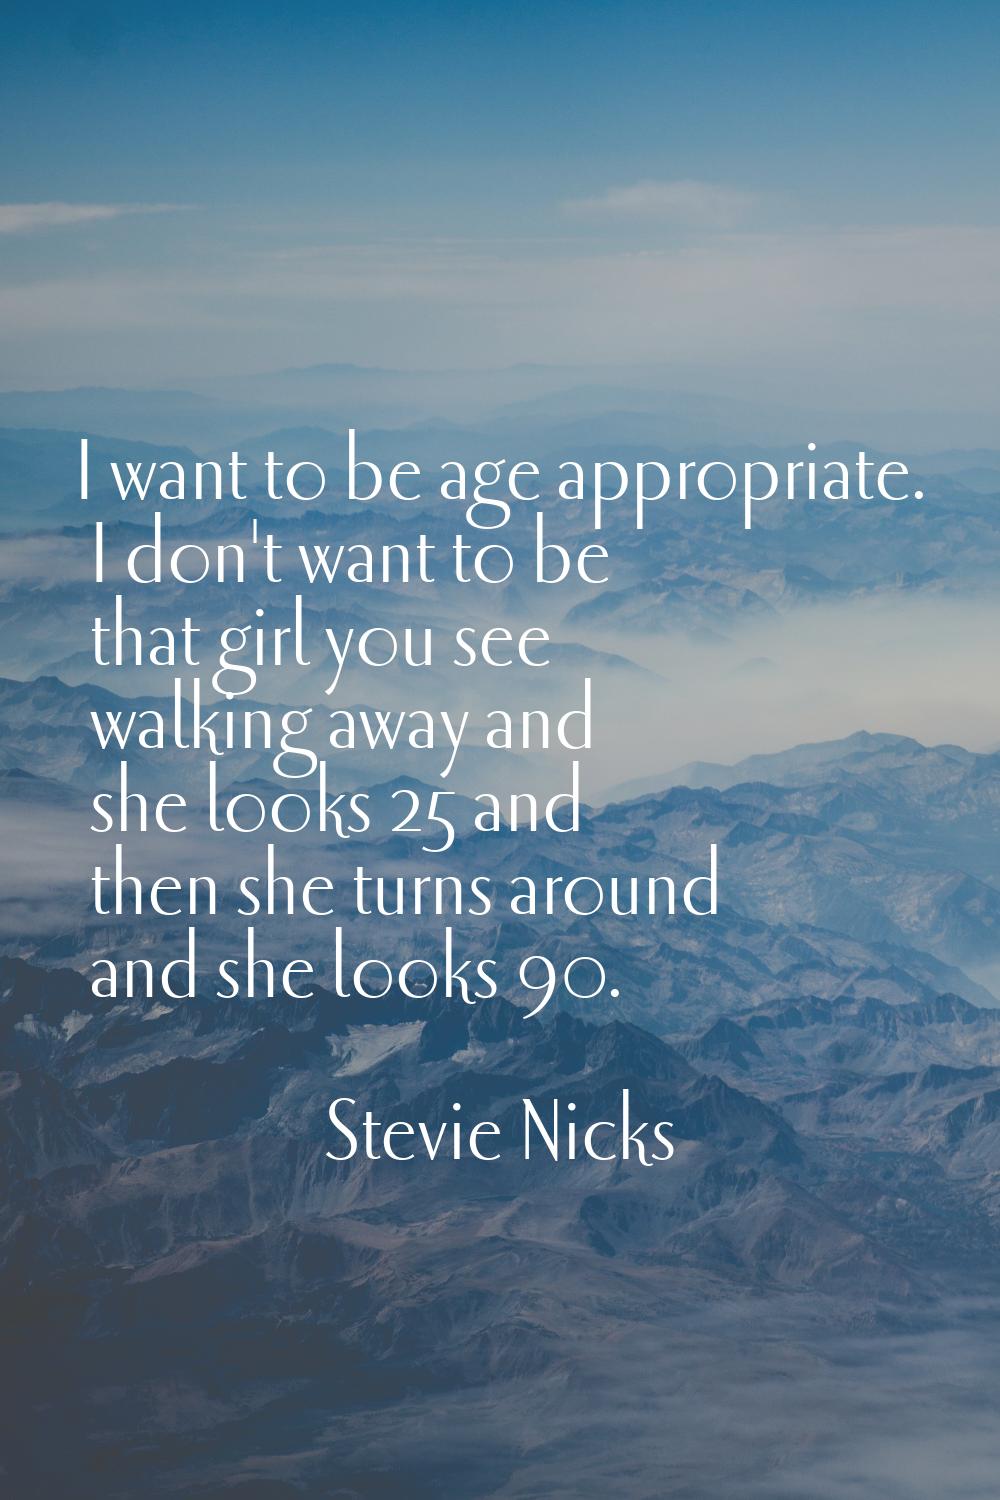 I want to be age appropriate. I don't want to be that girl you see walking away and she looks 25 an